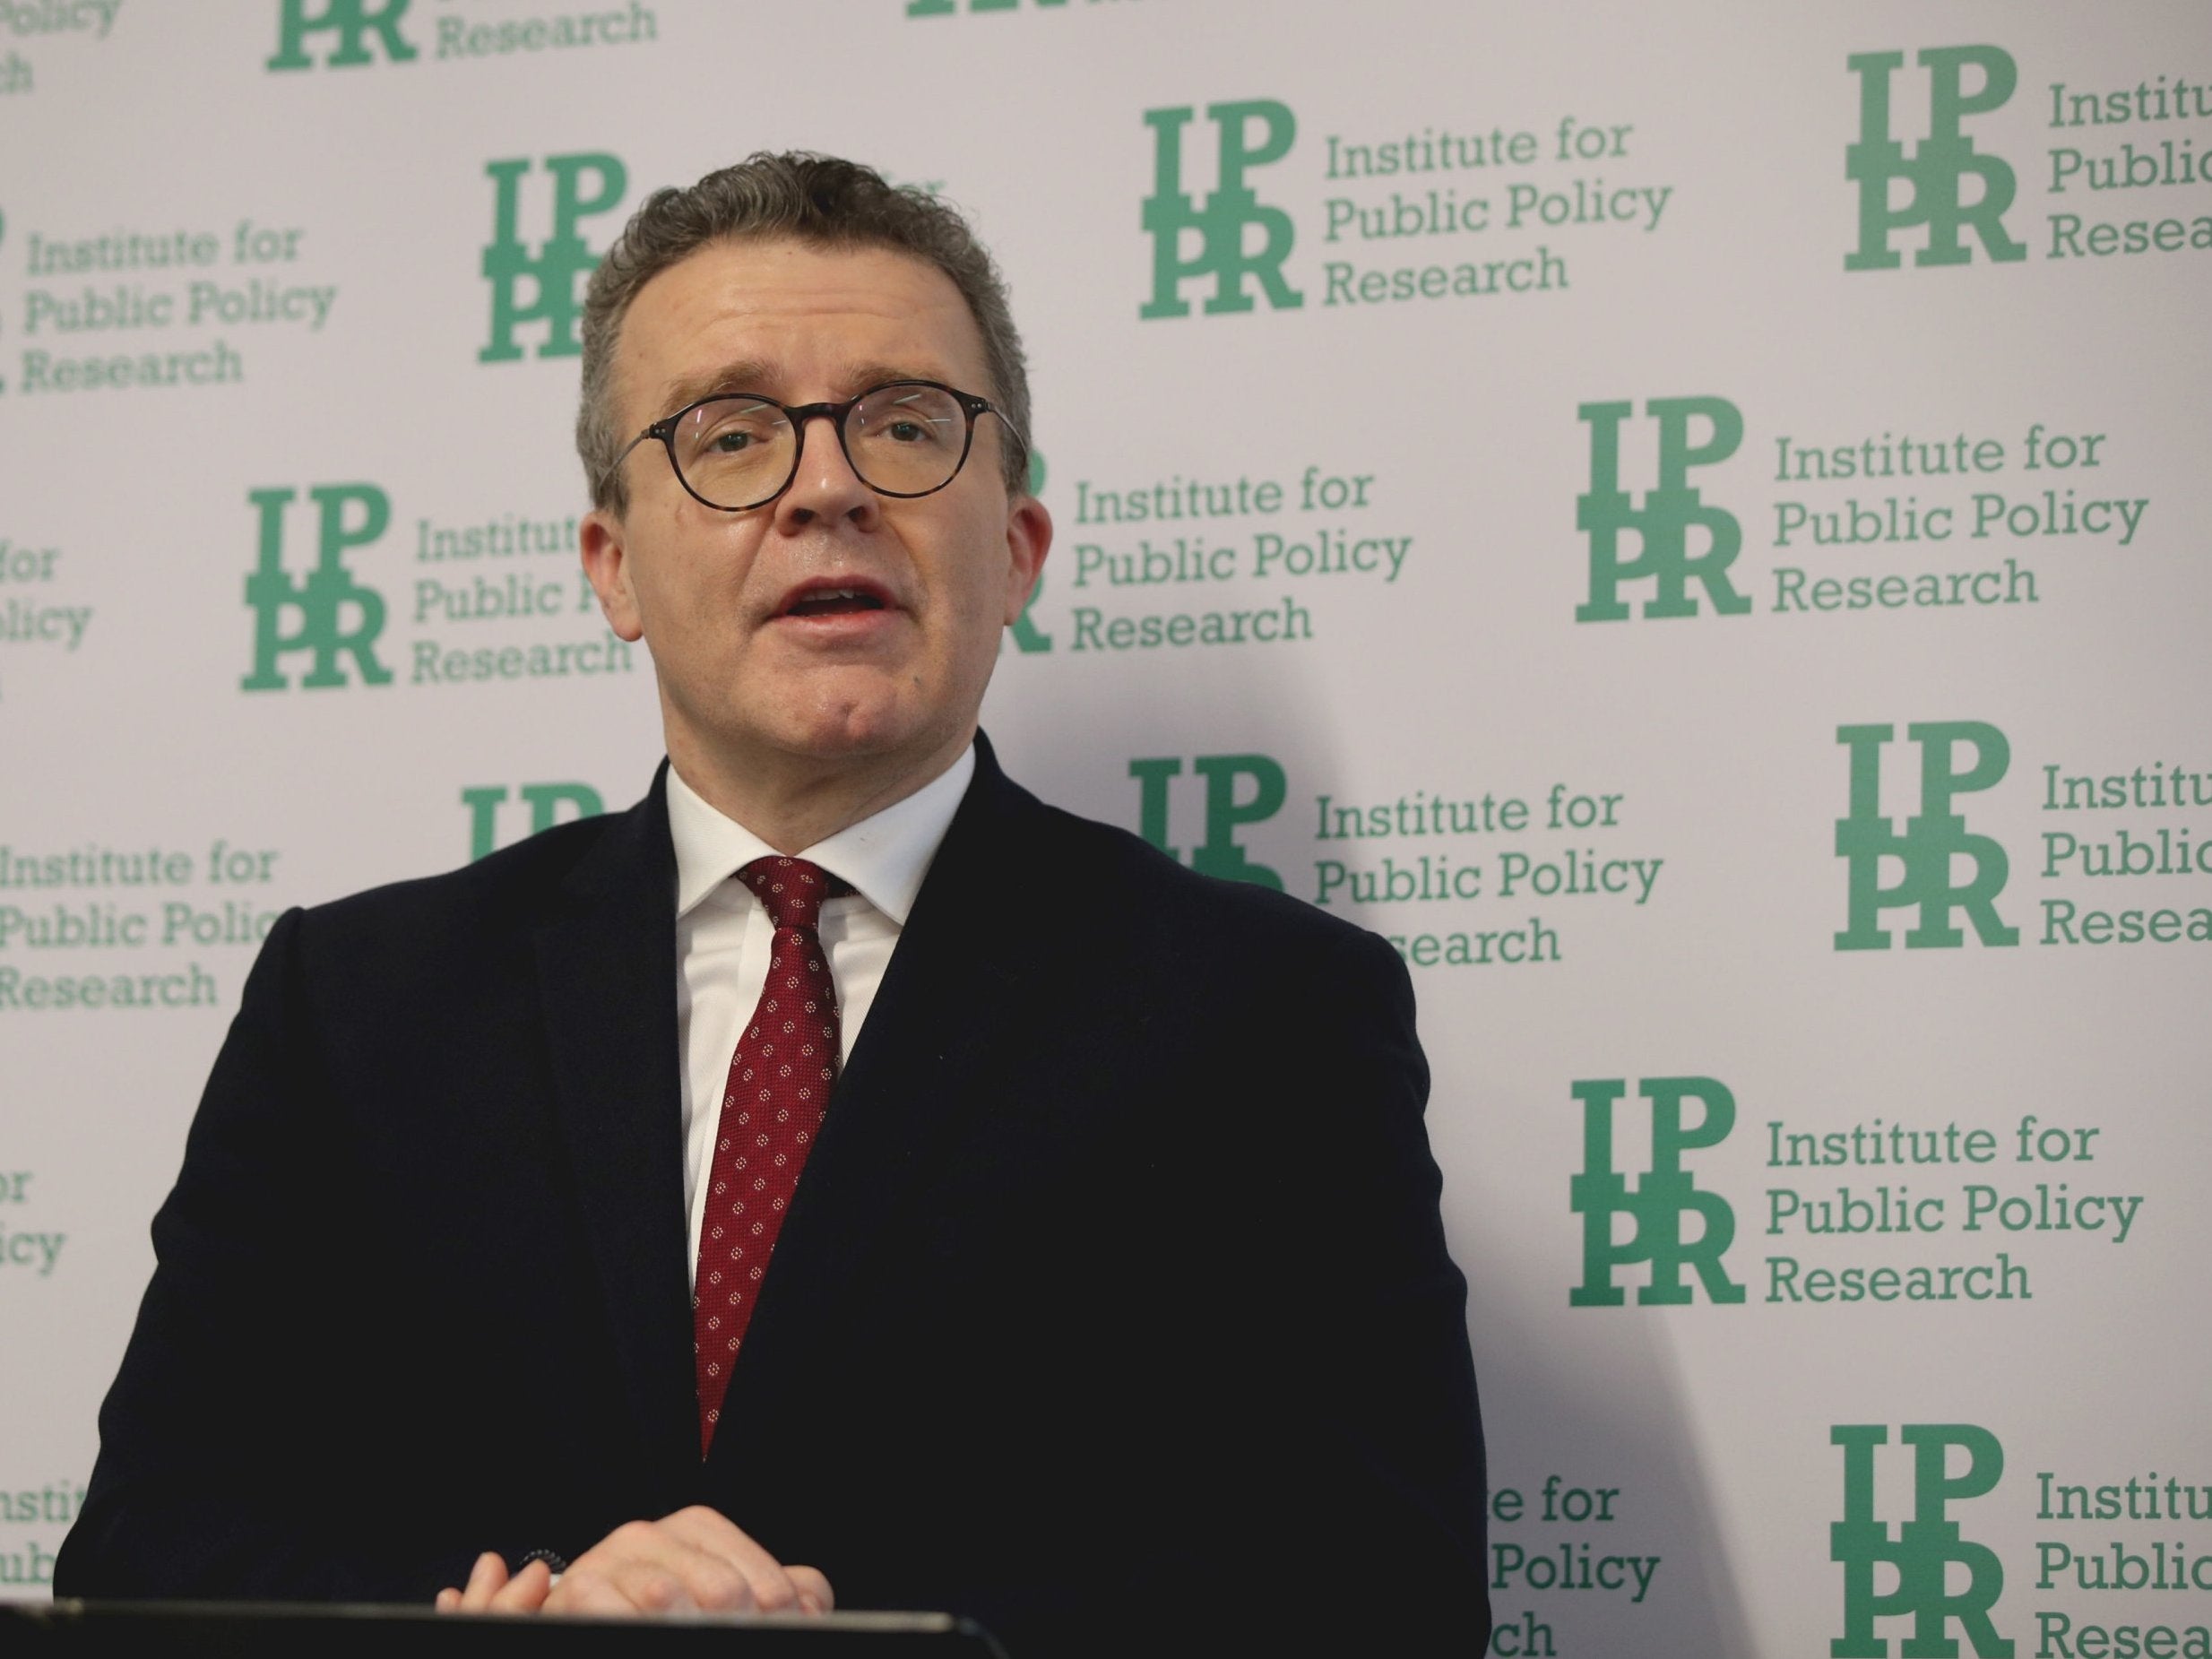 Tom Watson's office in racial discrimination row after ex-employee accuses colleague of harassment and bullying